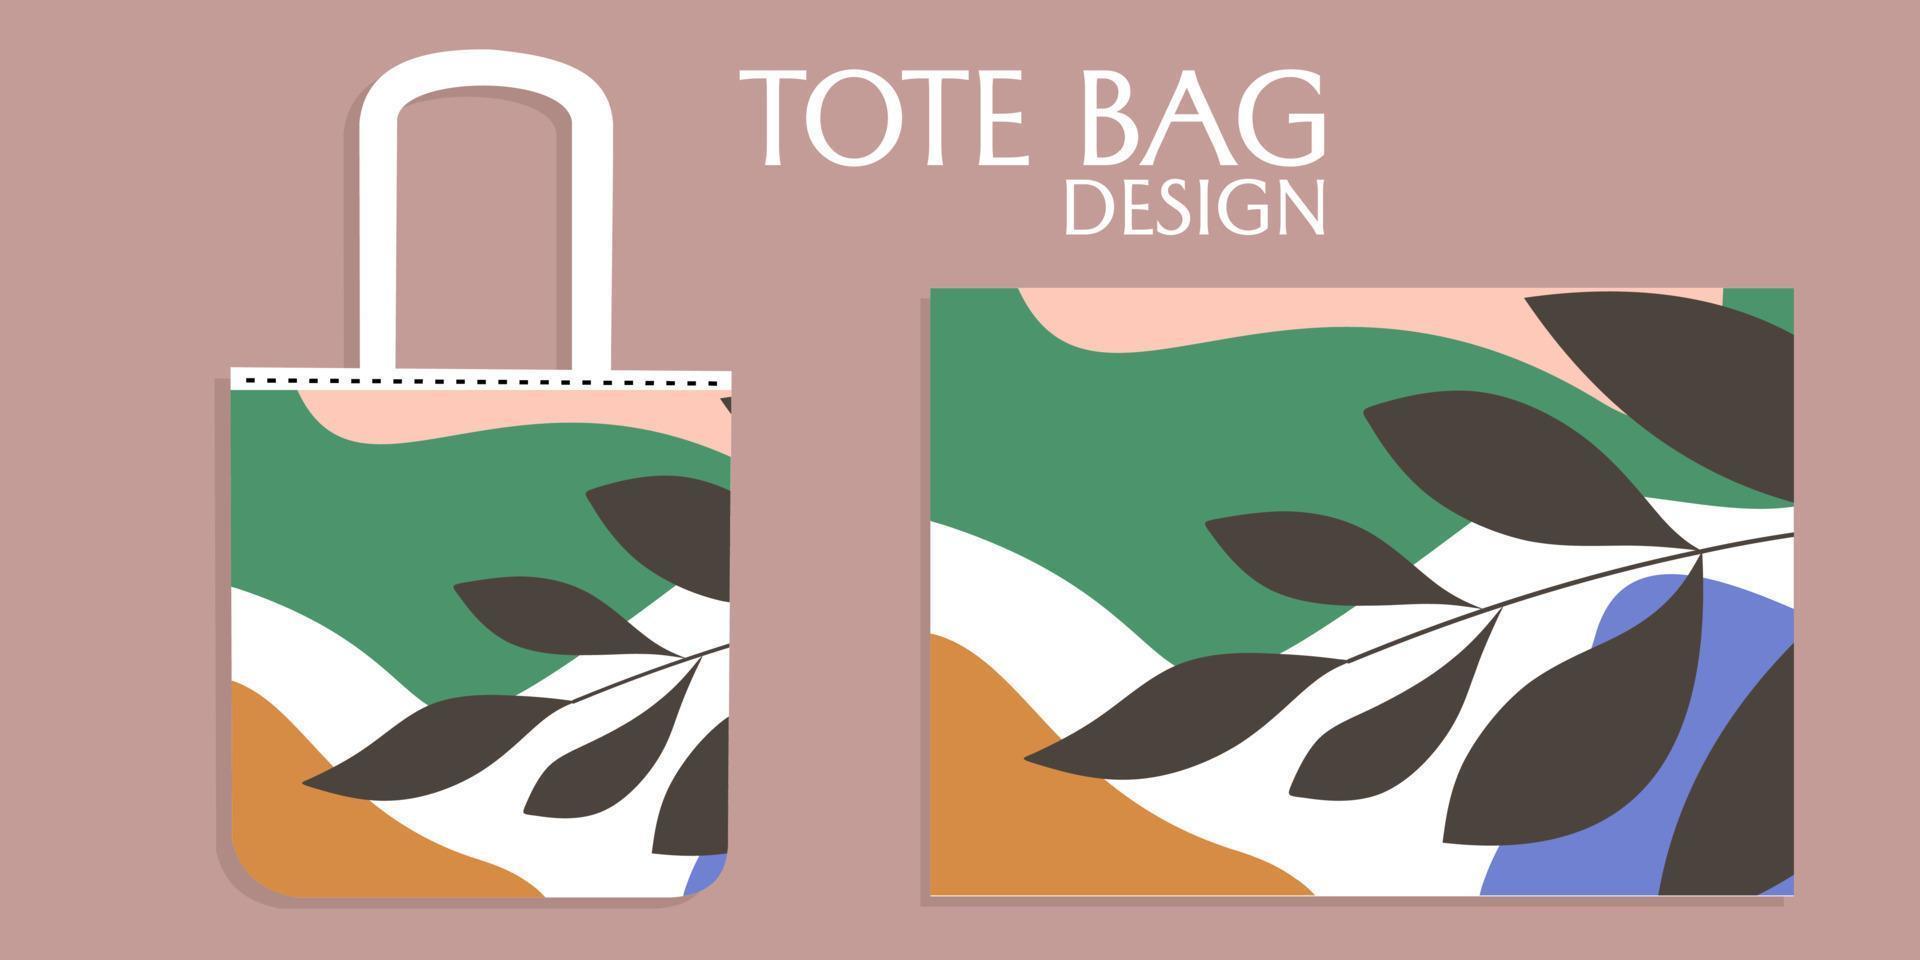 Canvas or tote bags made of of fabric.abstract botanical design.Cloth totebag with handle.Realistic vector illustration.shopping bag